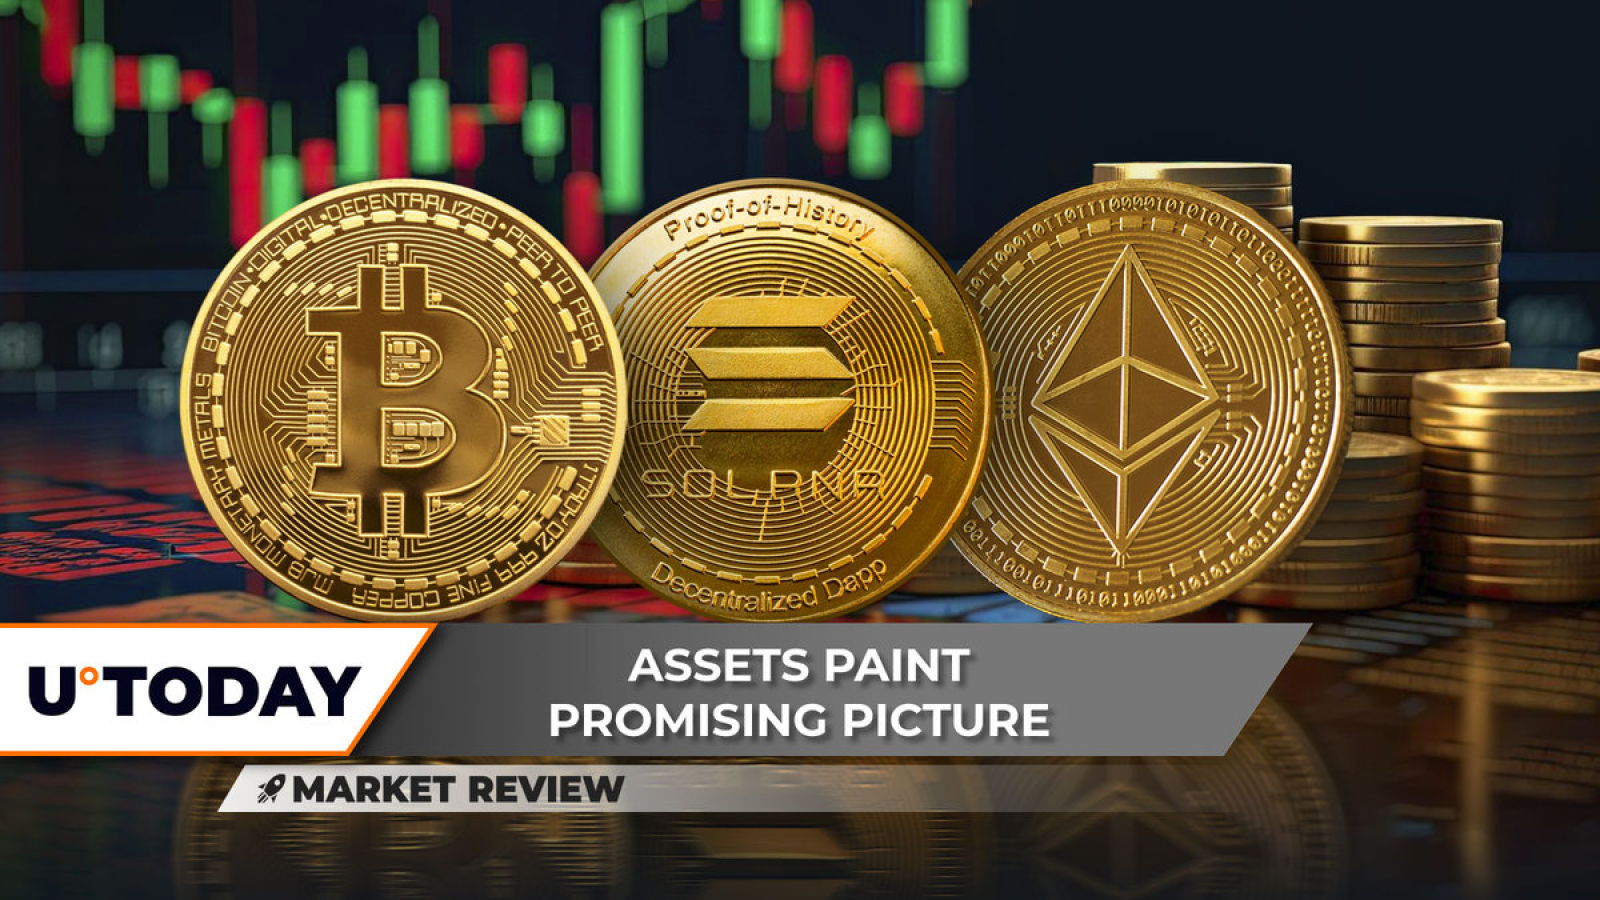 Bitcoin (BTC) to Test ATH Again? Solana (SOL) Surge Isn’t Stopping, Ethereum (ETH) Paints Symmetrical Triangle Pattern